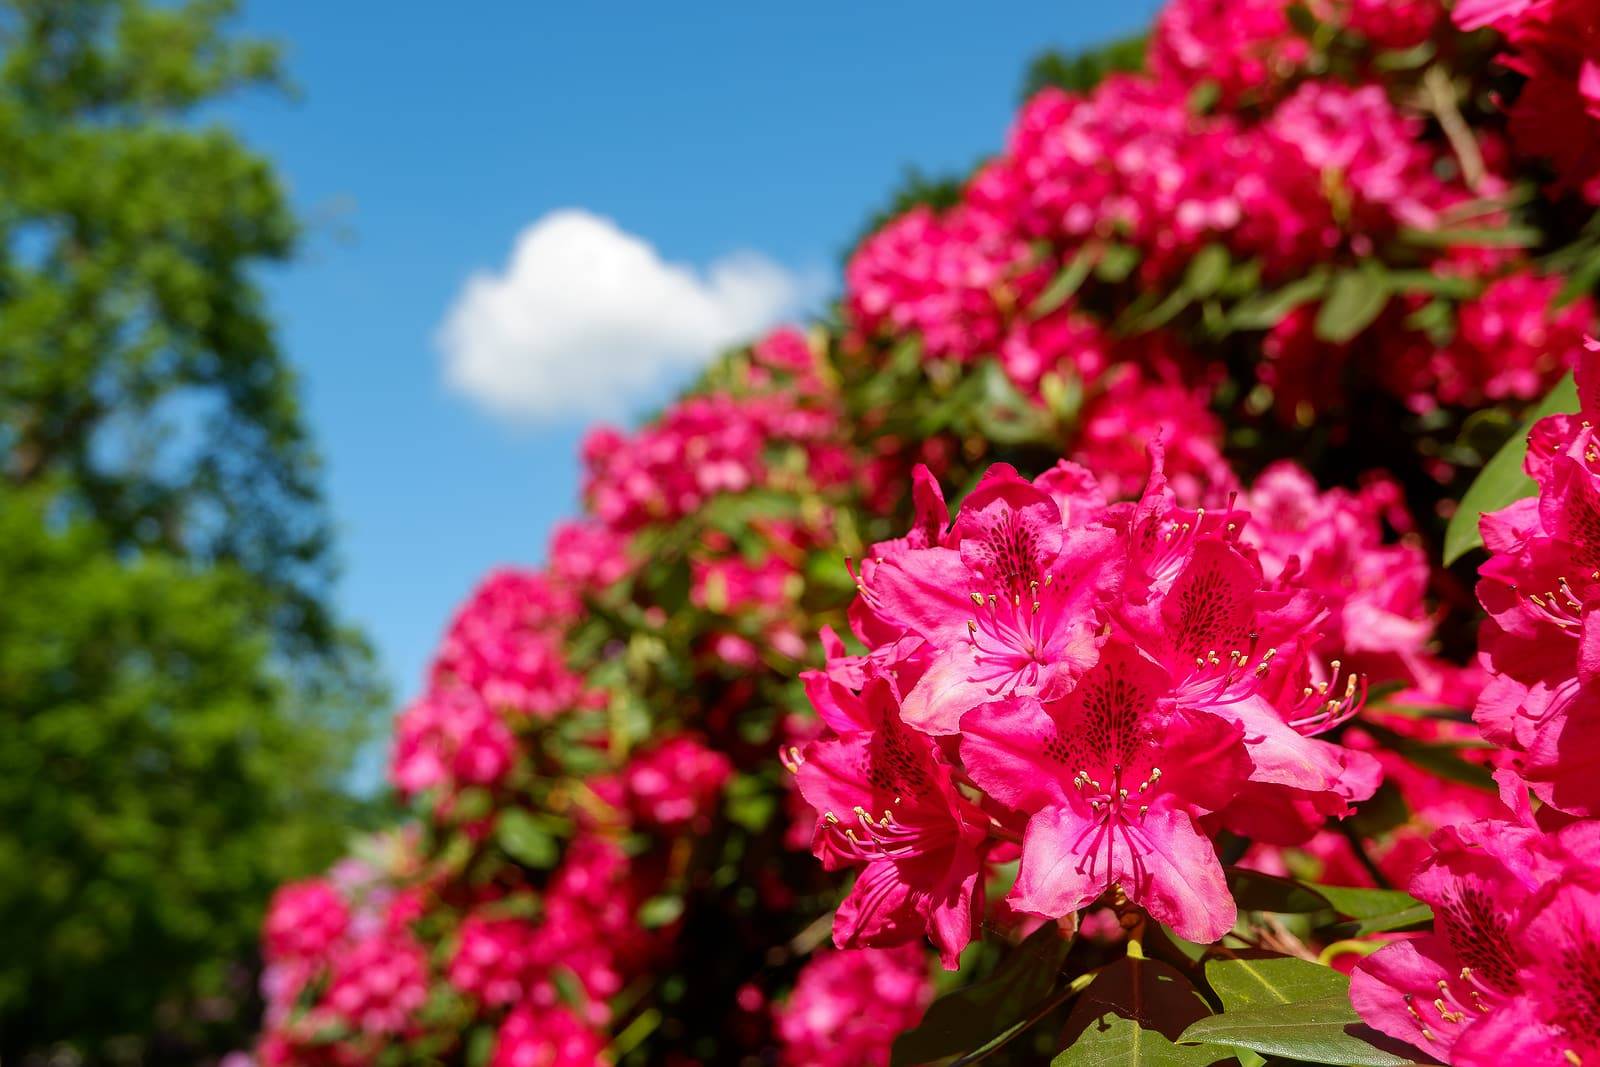 Top 5 Trees To Add Color to Your Backyard